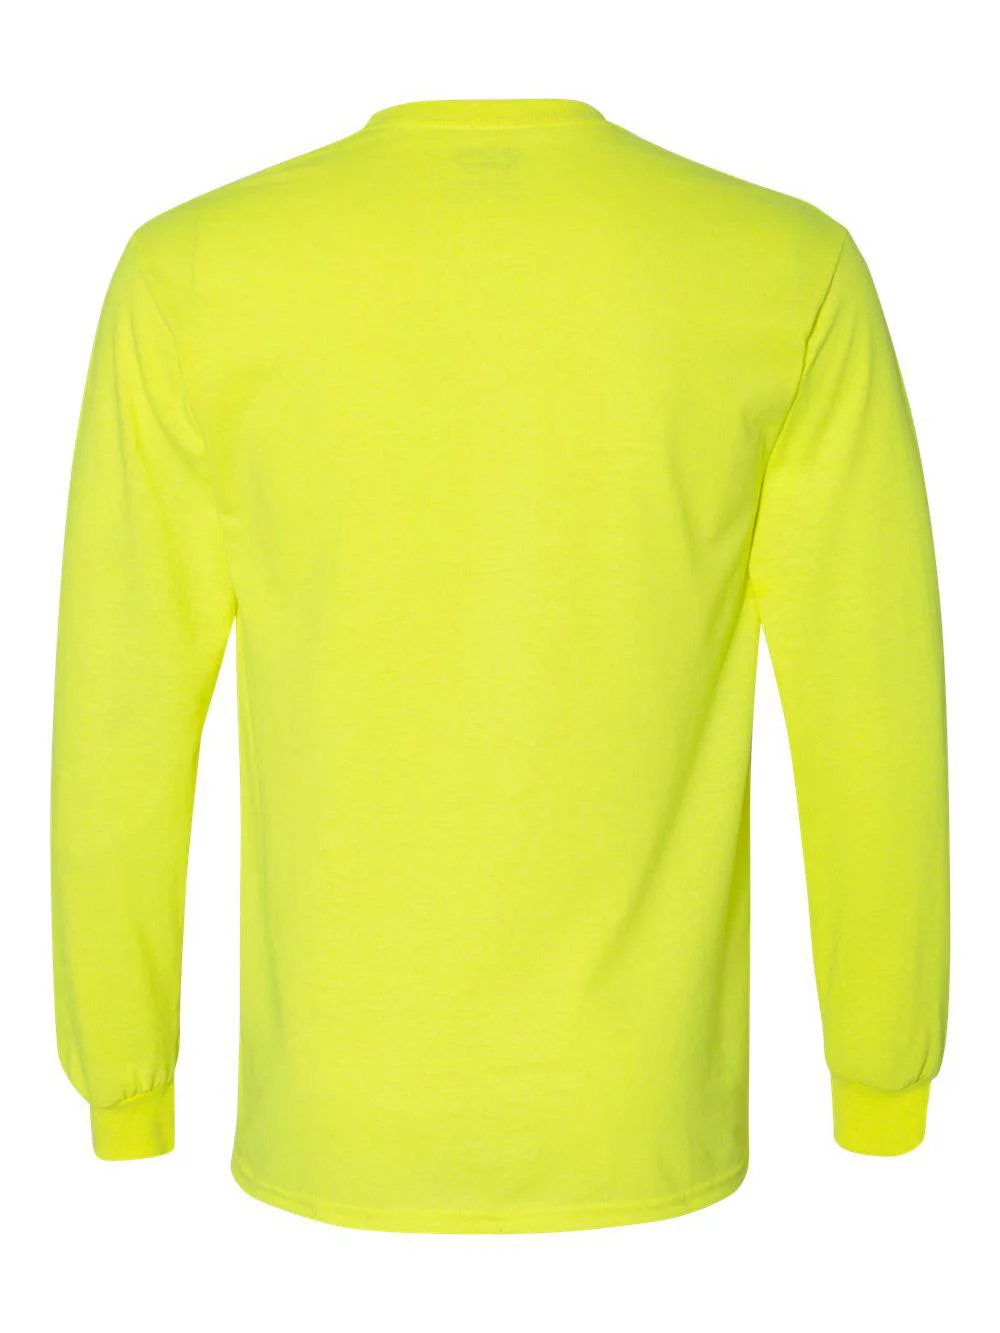 Gildan G8400 Stay Dry and Stylish with this Performance Shirt